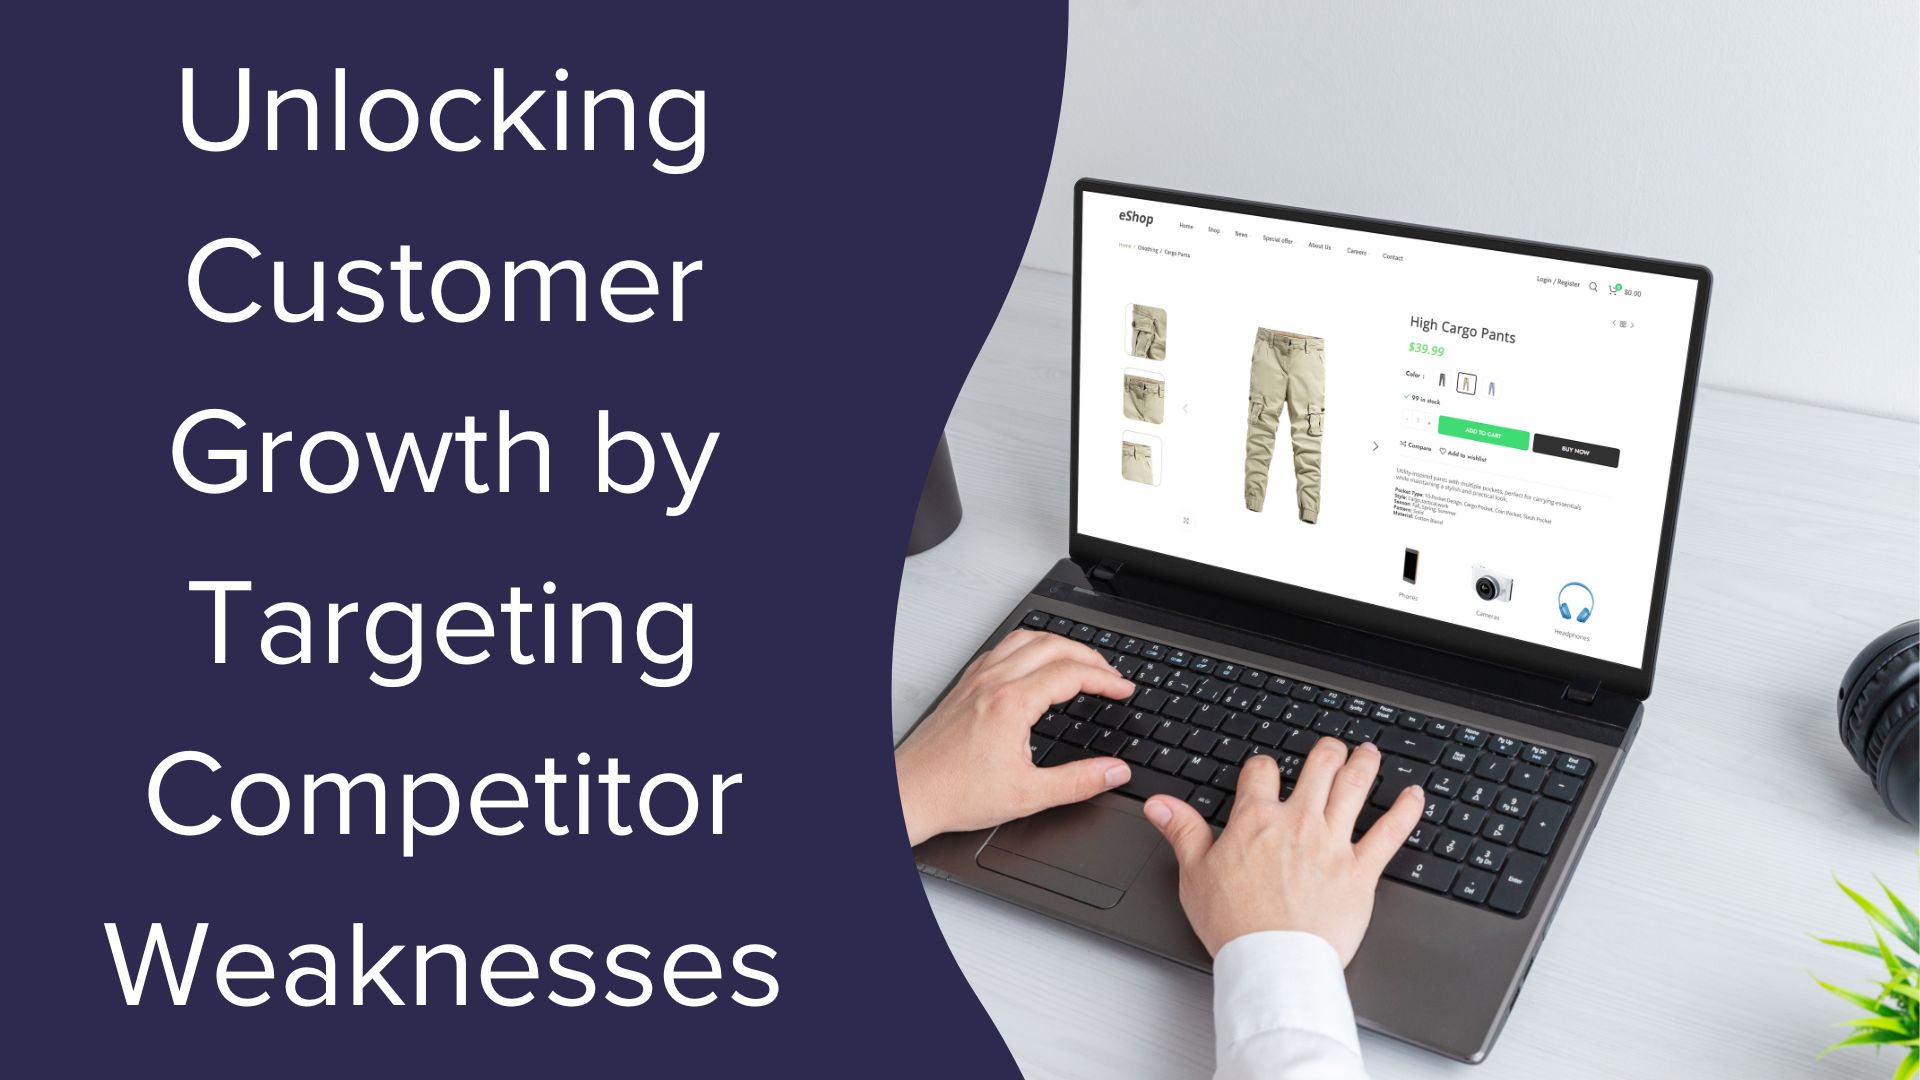 Unlocking Customer Growth by Targeting Competitor Weaknesses